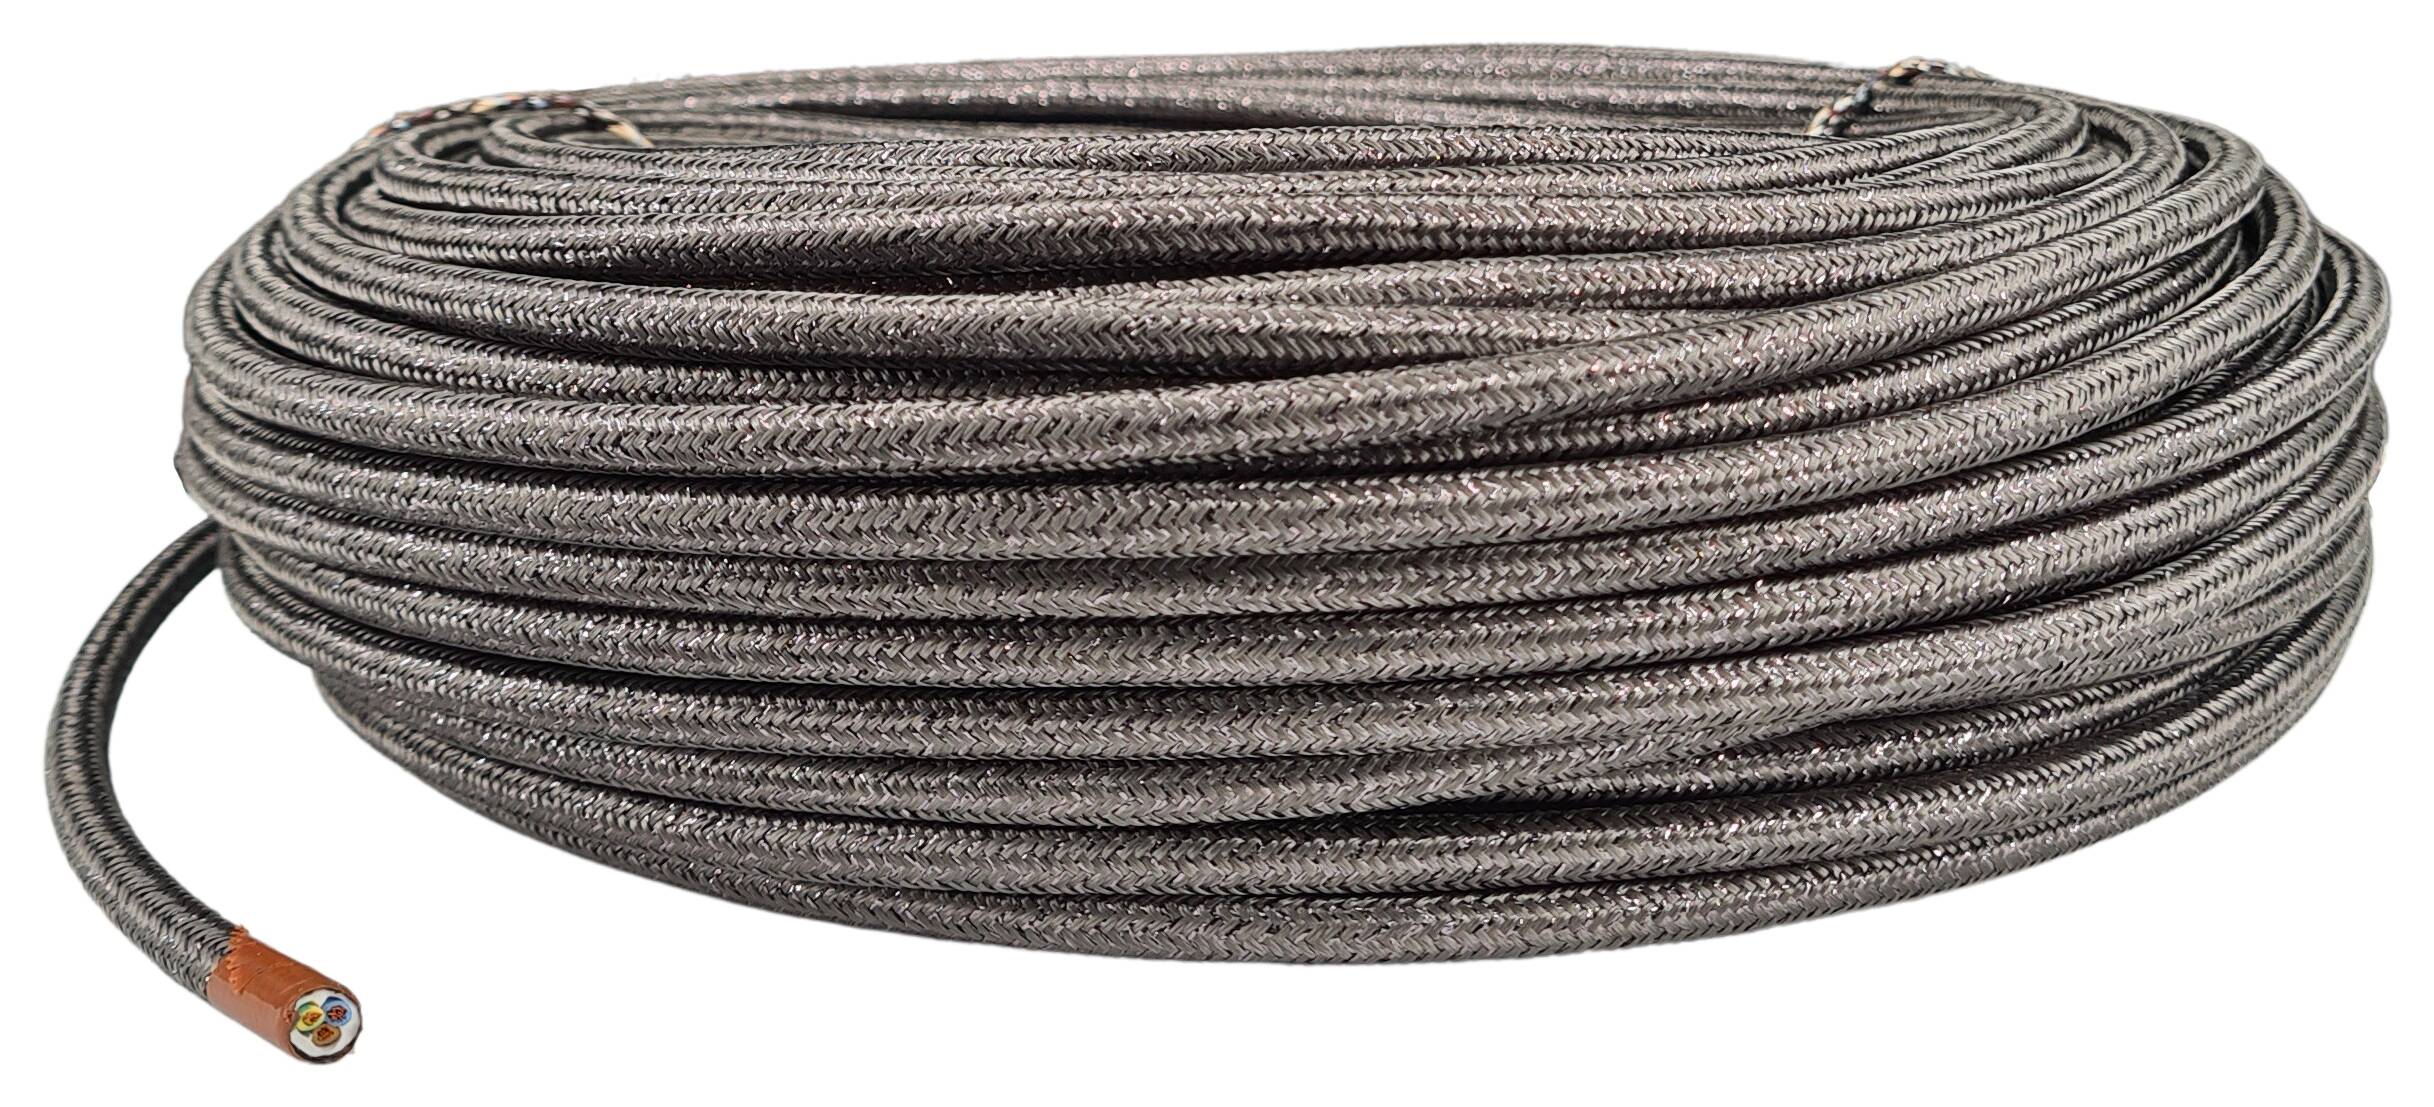 cable 3G 0,75 H03VV-F textile braided metallic RAL 7024 graphitegrey